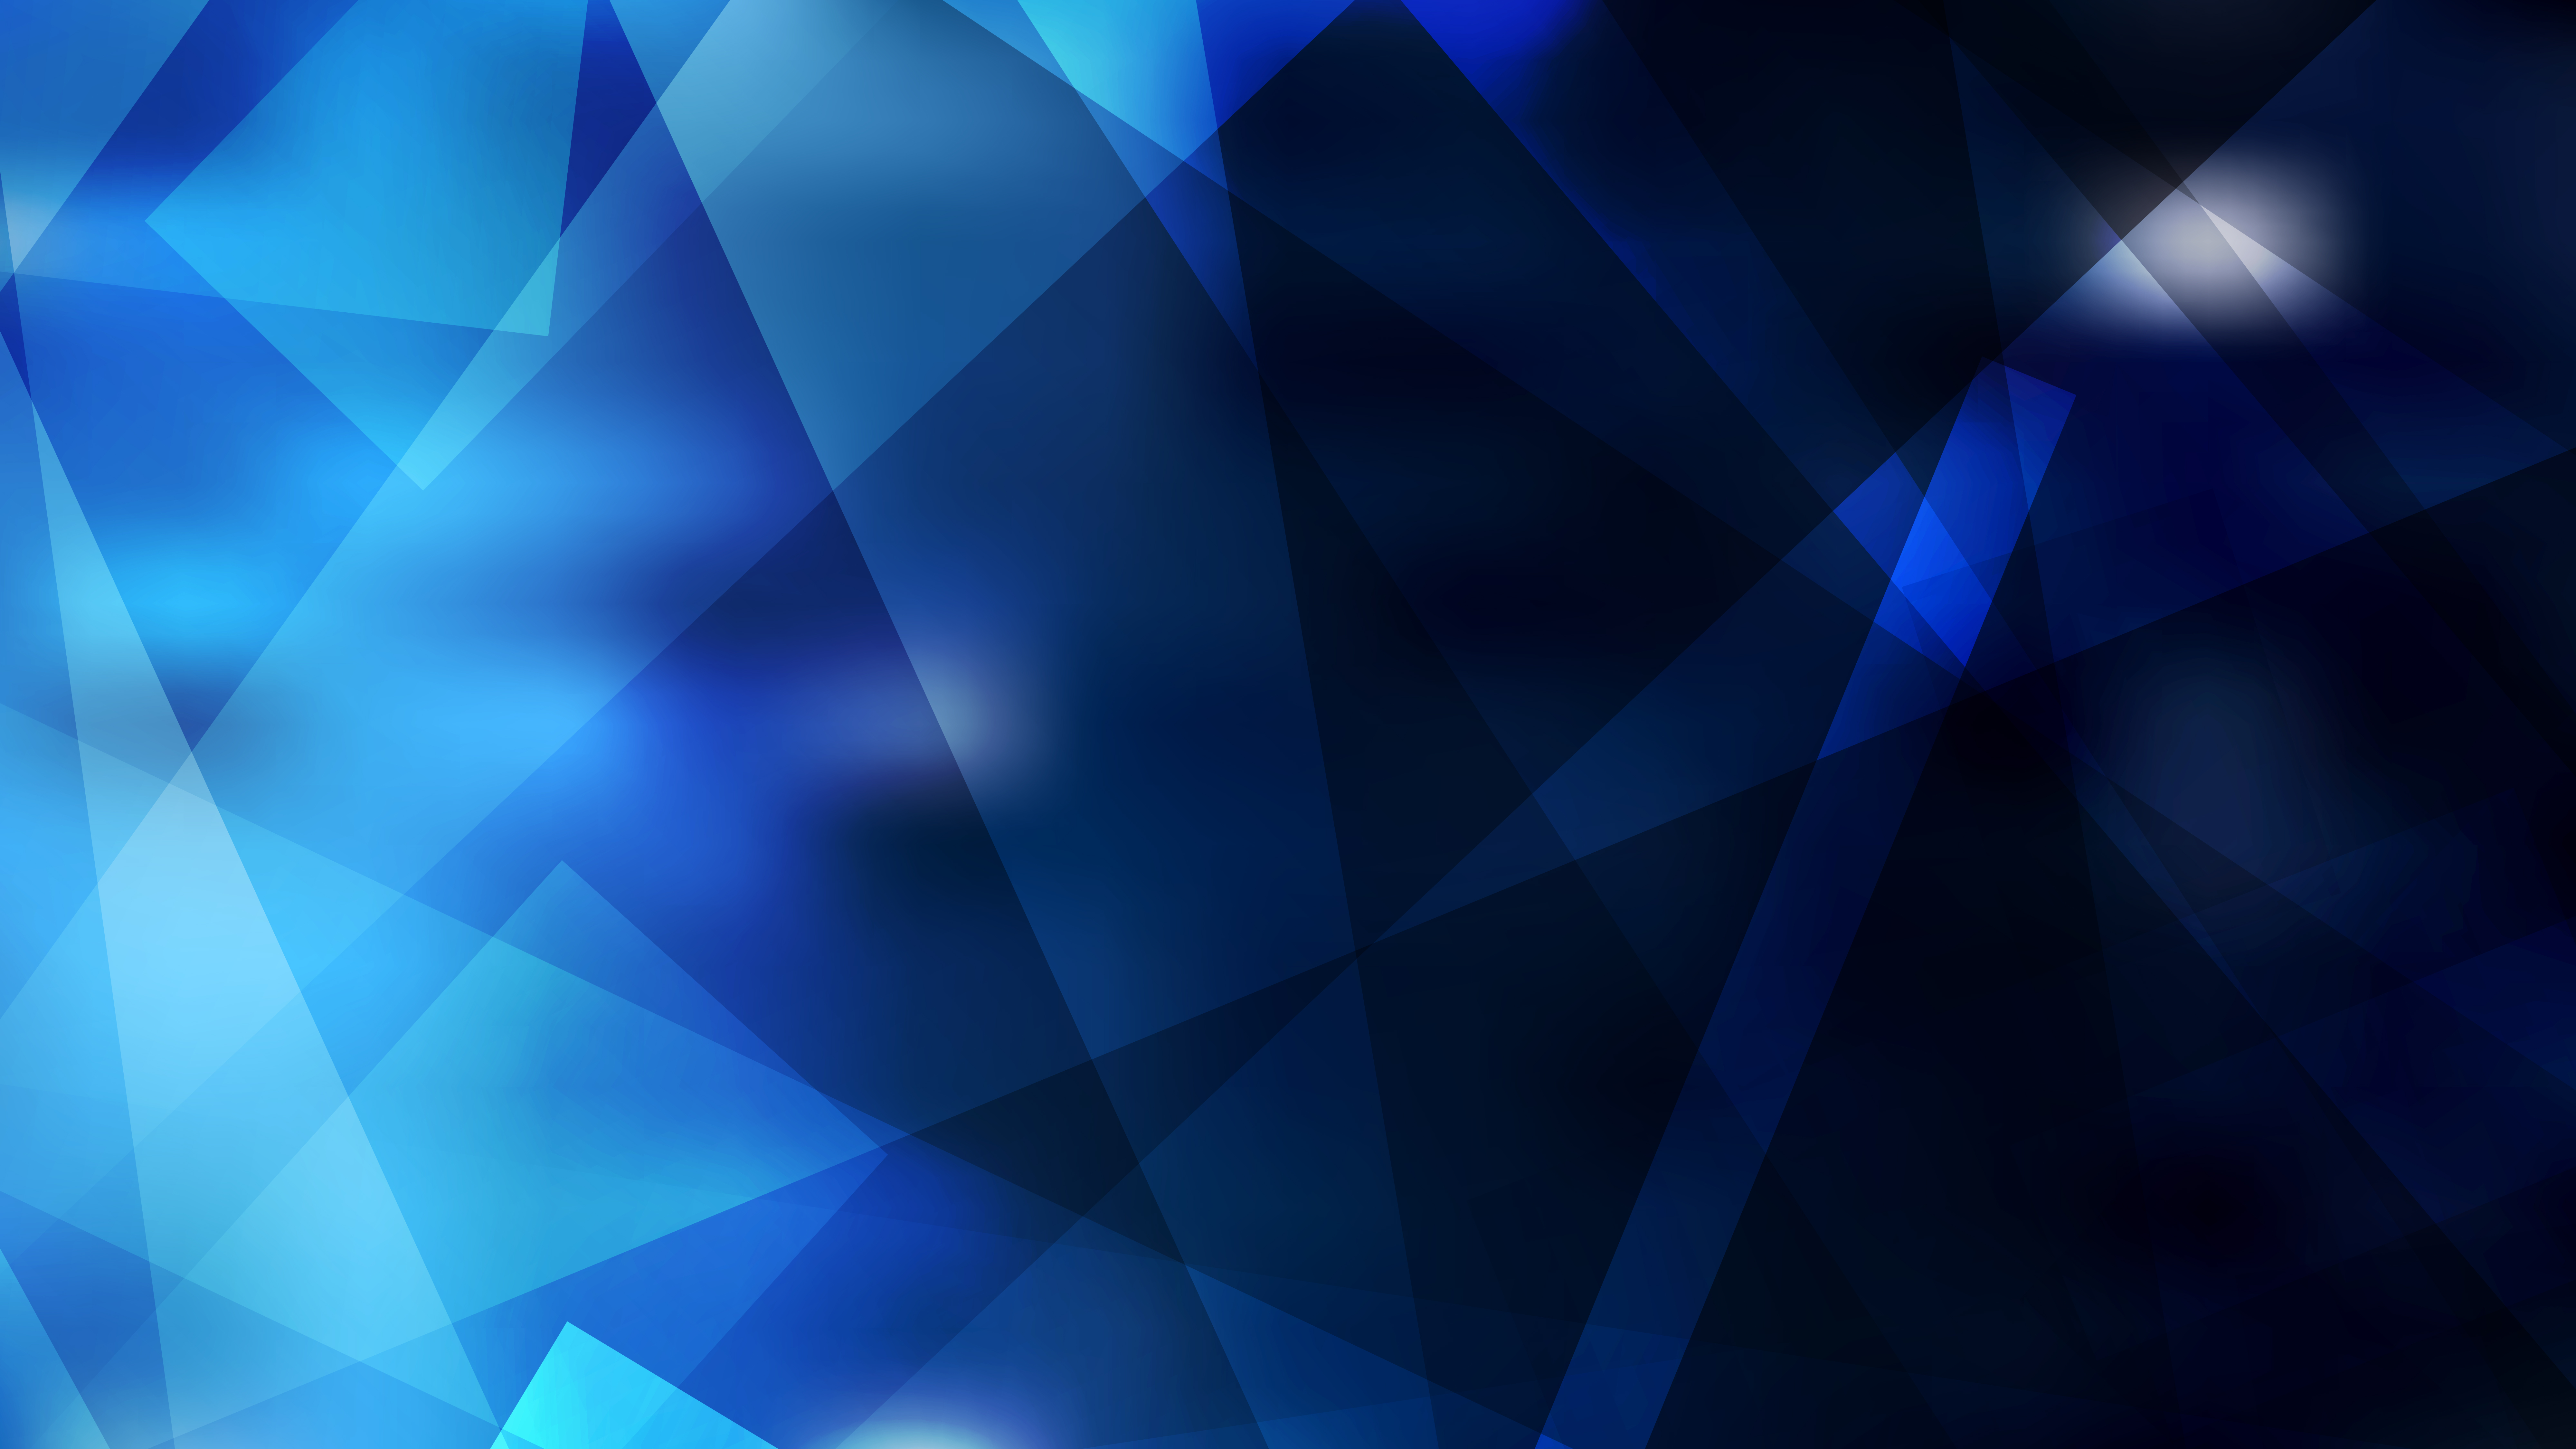 Geometric Abstract Blue Background Hd - lullypoell